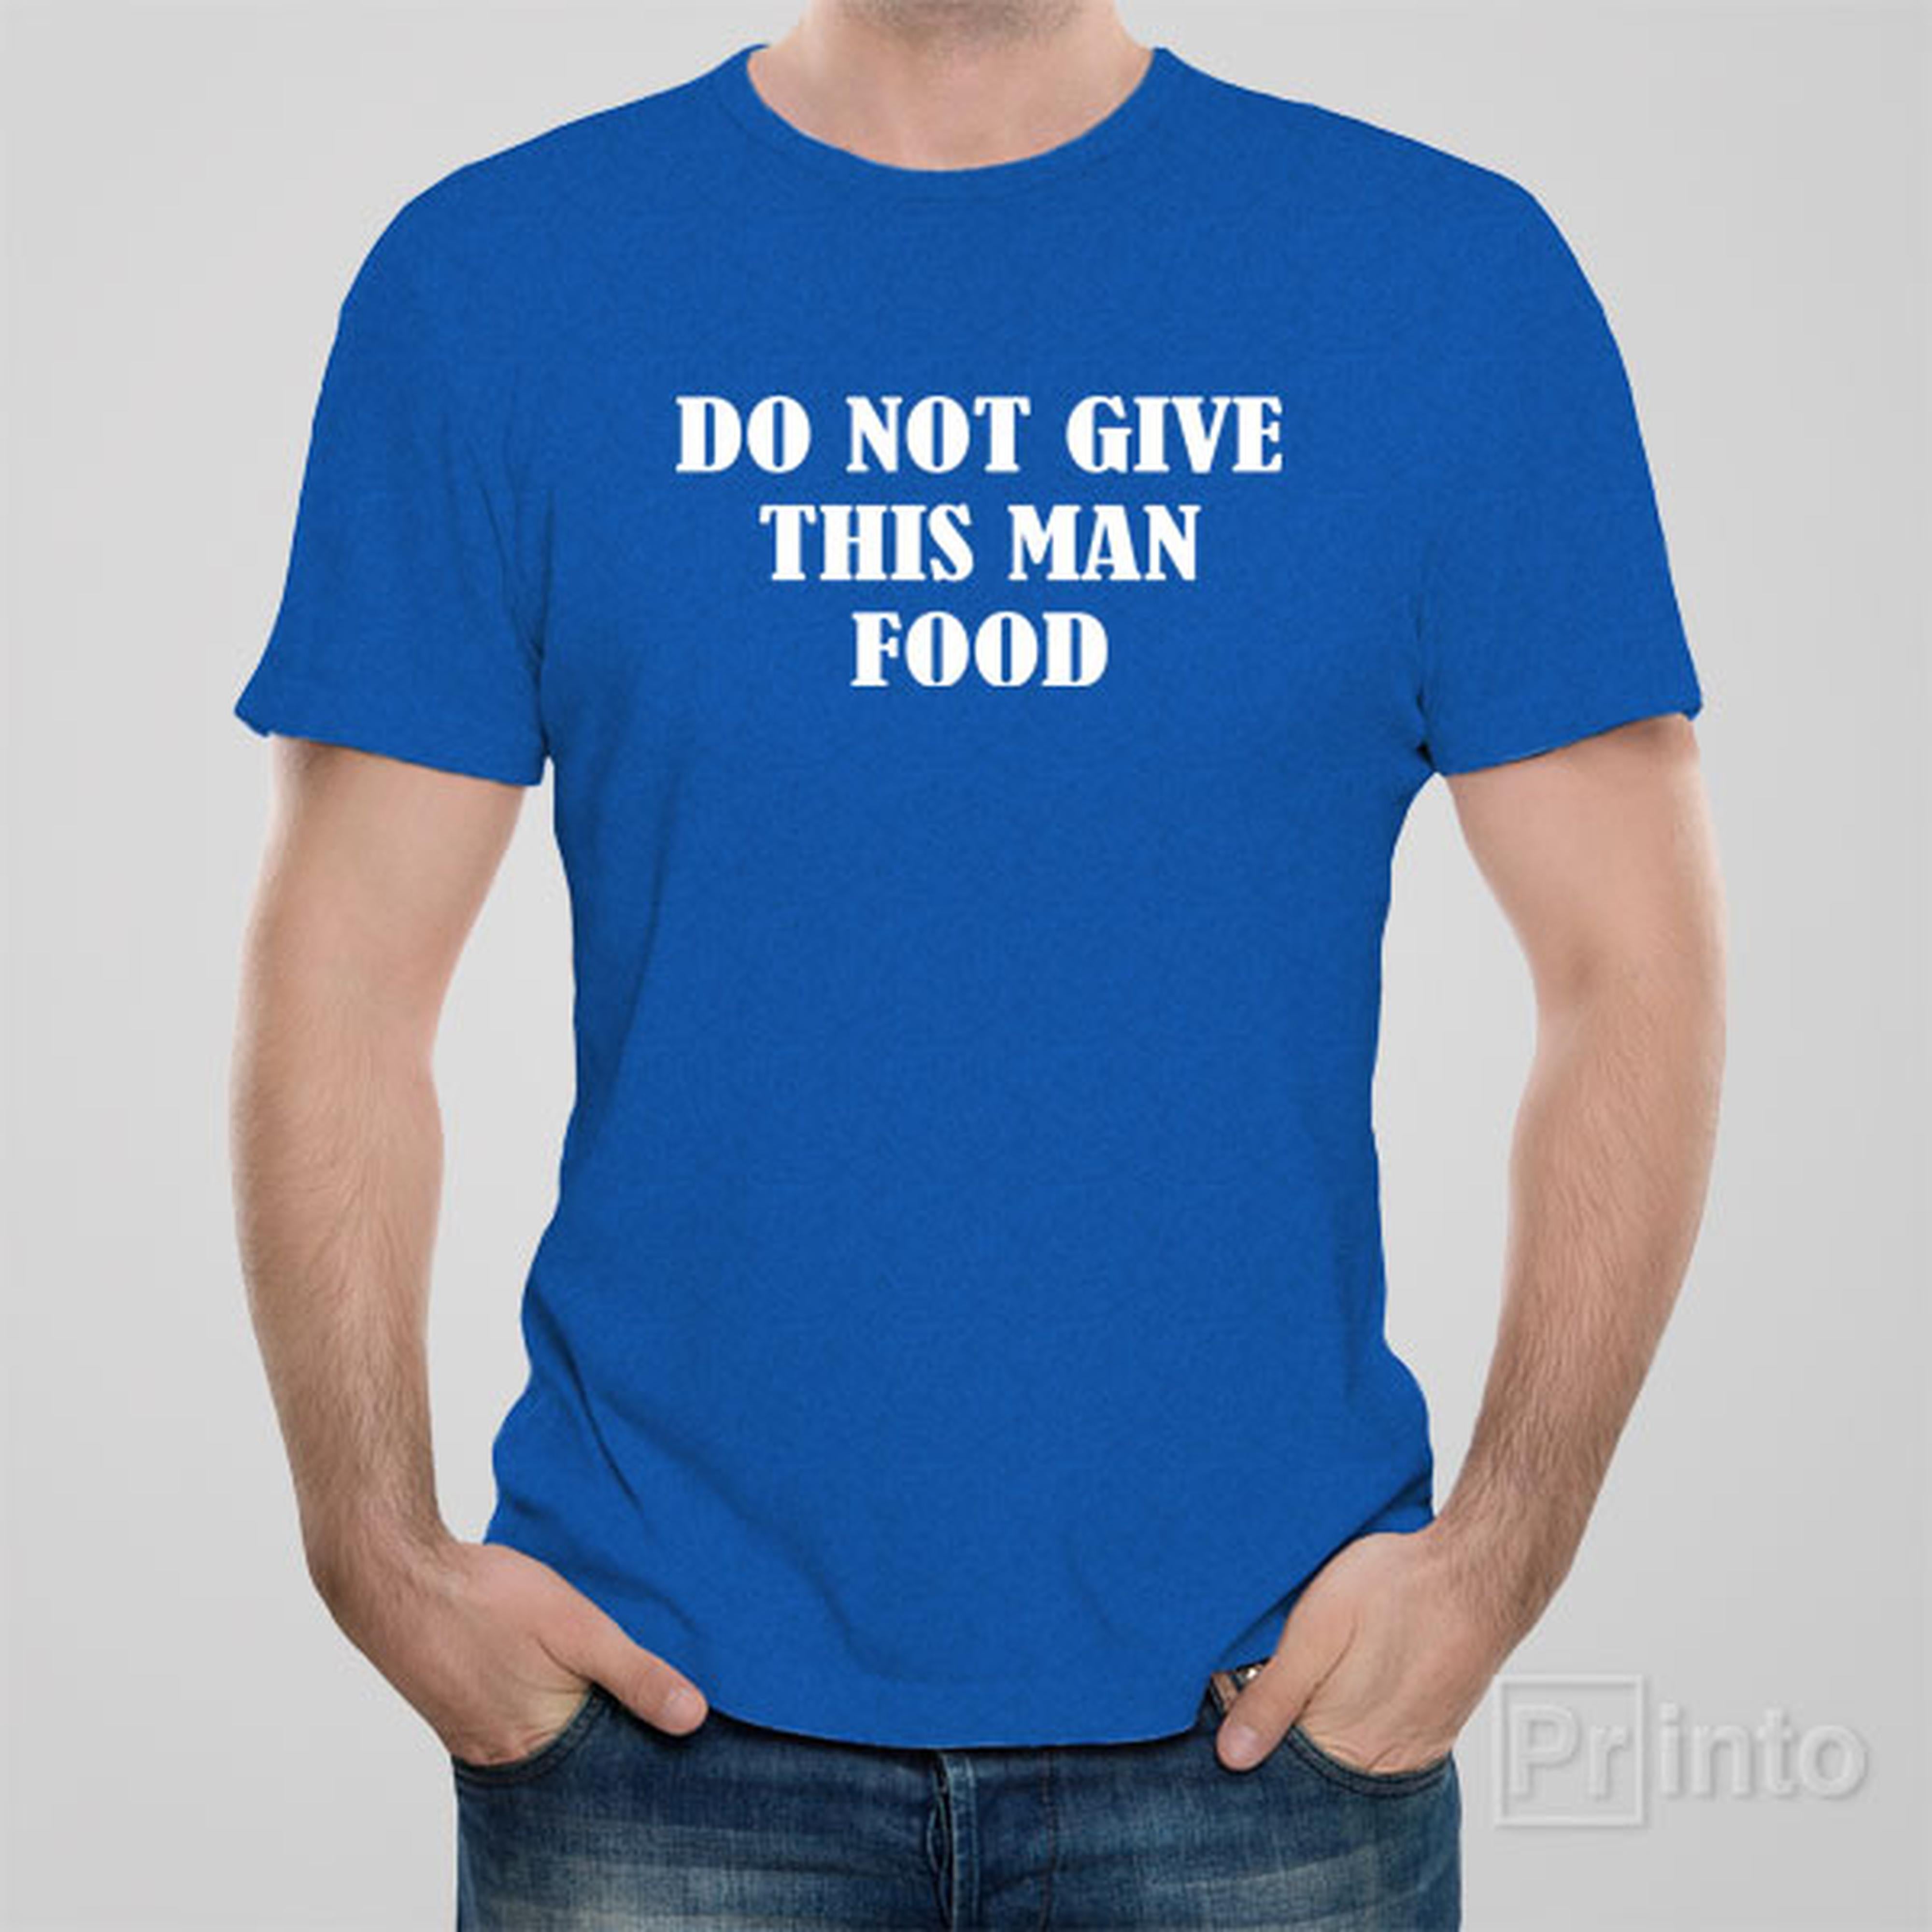 do-not-give-this-man-food-t-shirt